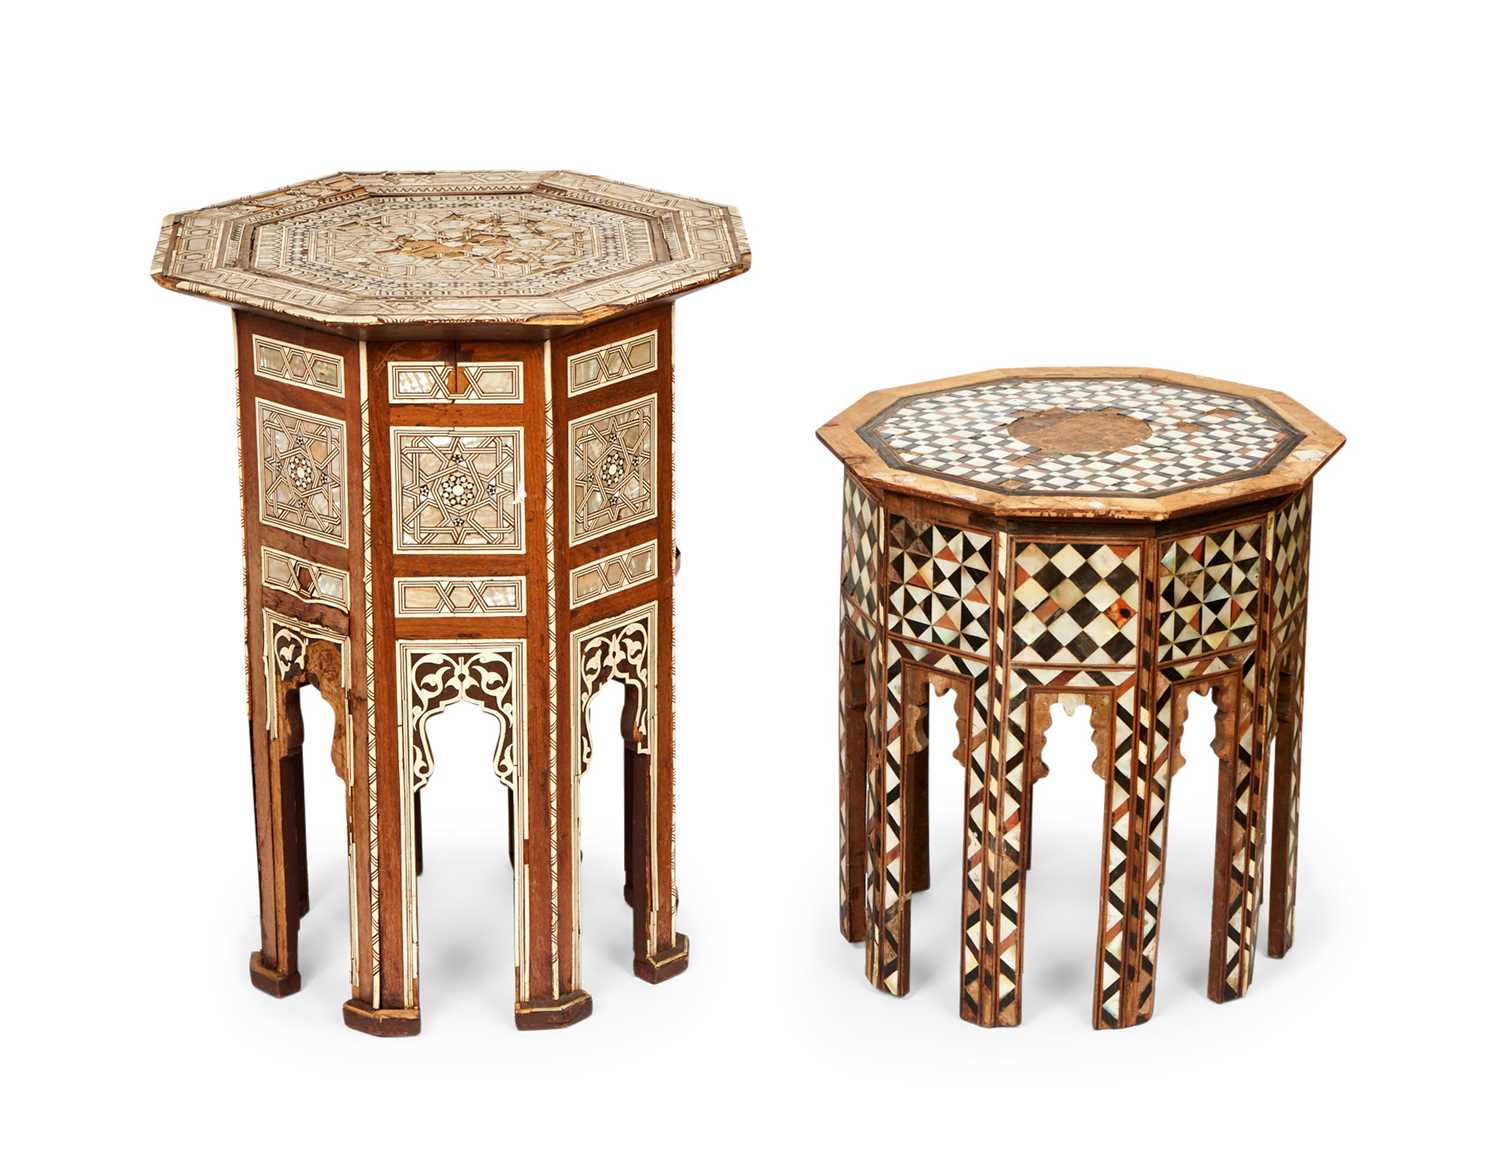 TWO OTTOMAN EARLY 20TH CENTURY MOTHER OF PEARL VENEERED OCCASIONAL TABLES